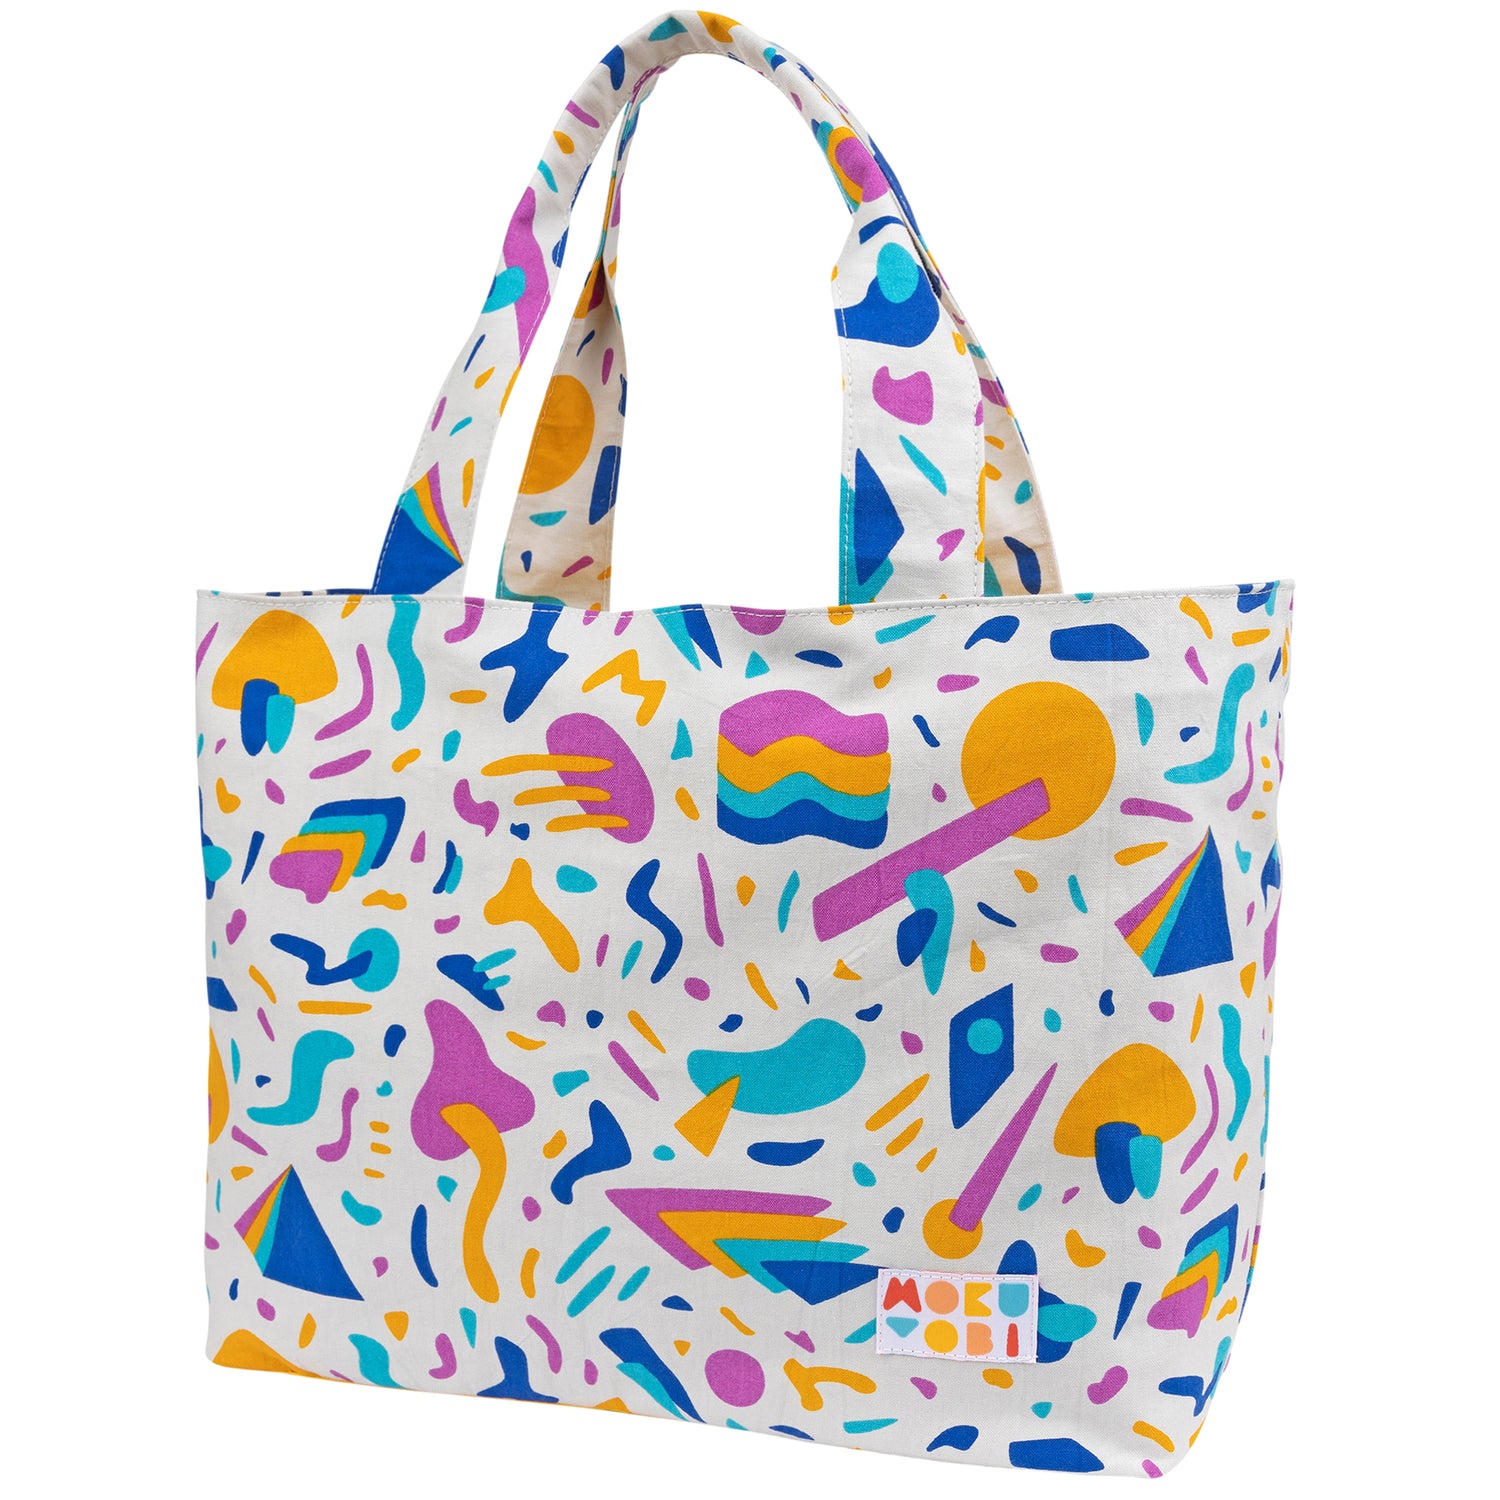 Large tote bag with all over colorful patterns